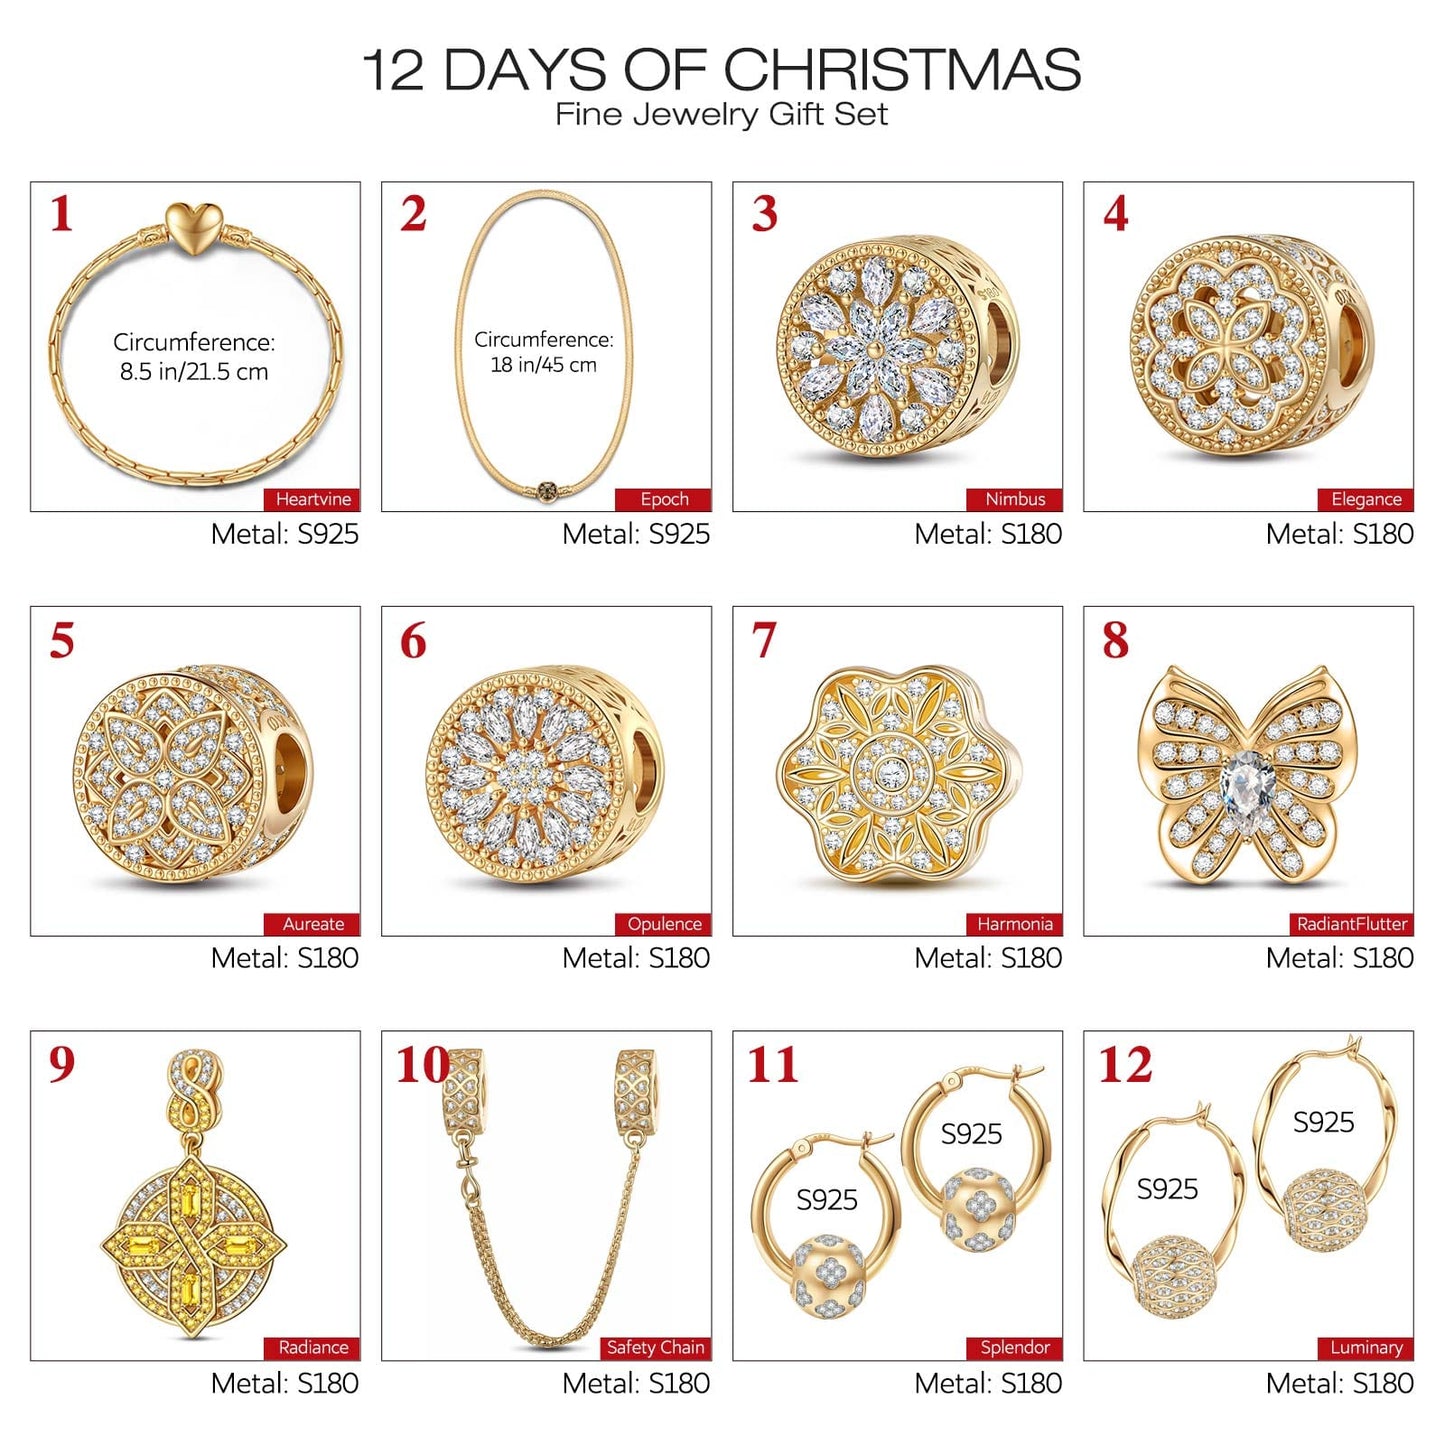 The Iconic Advent Calendar - 12 Days of Christmas Fine Jewelry Gift Set: Sterling Silver Golden Christmas Earrings and Charms Bracelet Set With Enamel and Necklace In 14K Gold Plated